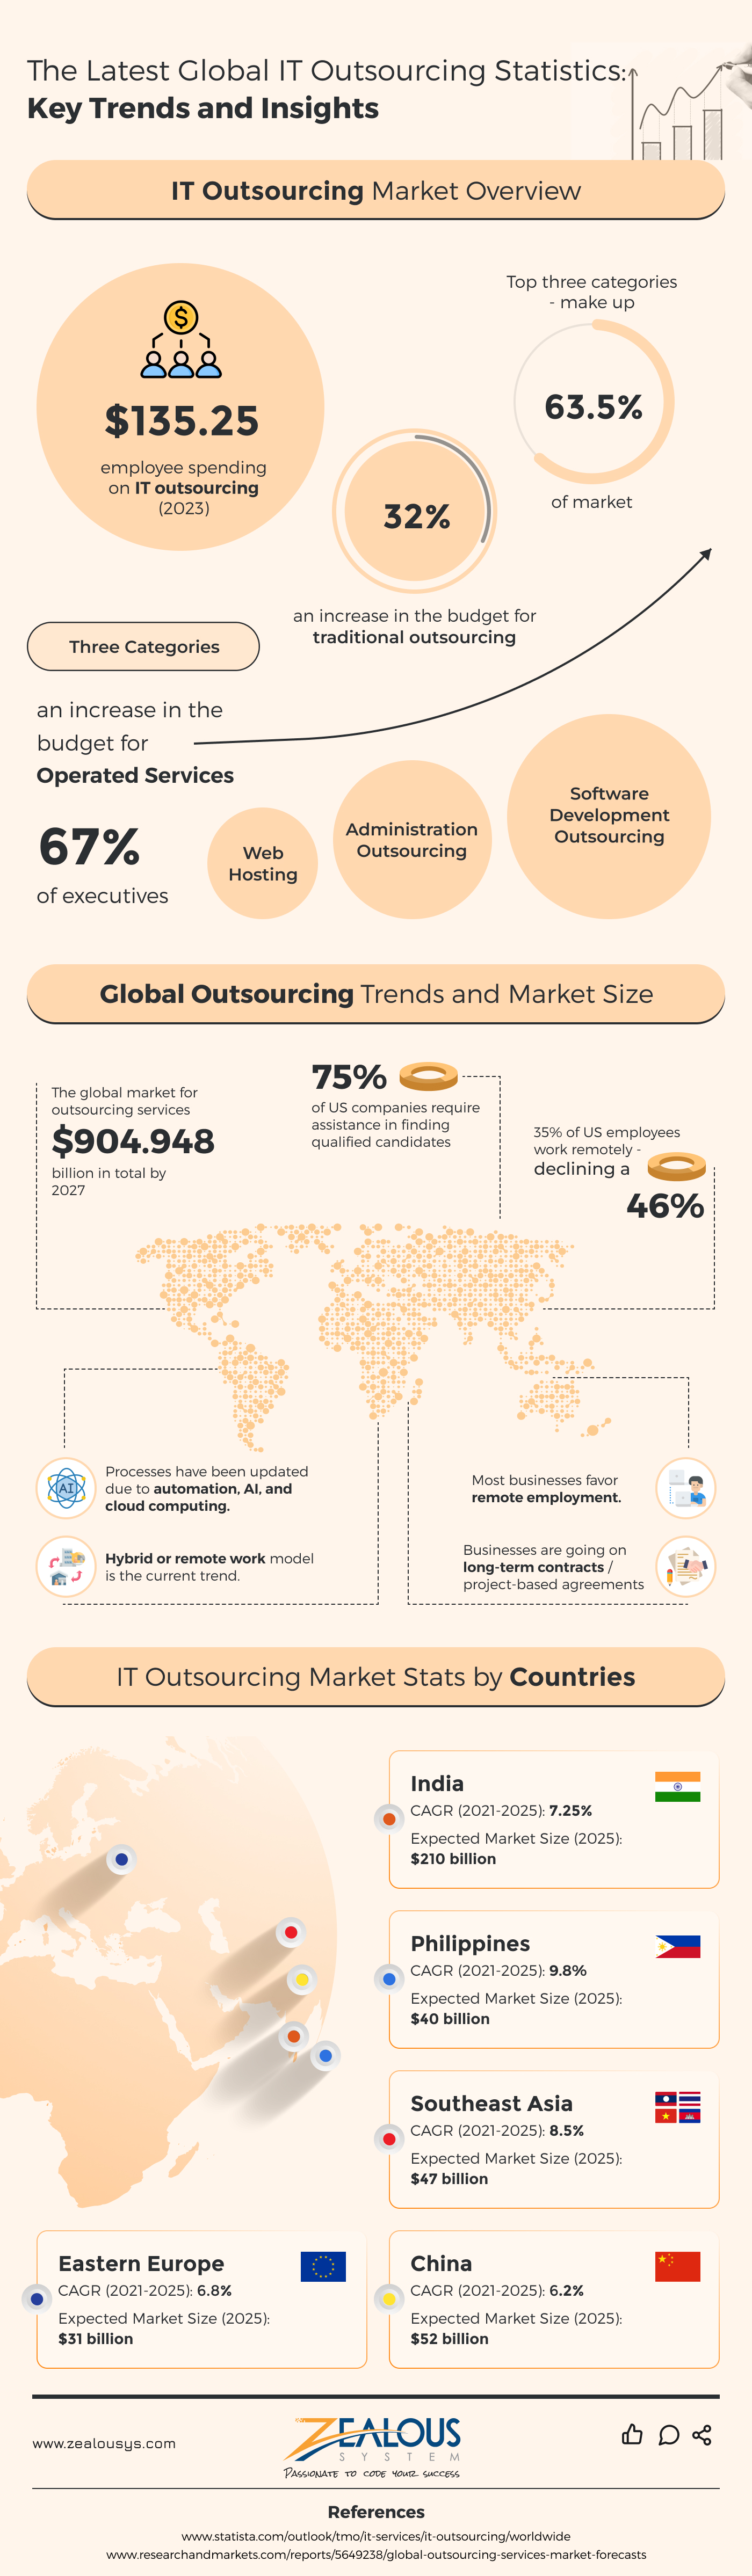 IT Outsourcing Statistics, Market Size & Trends Infographic